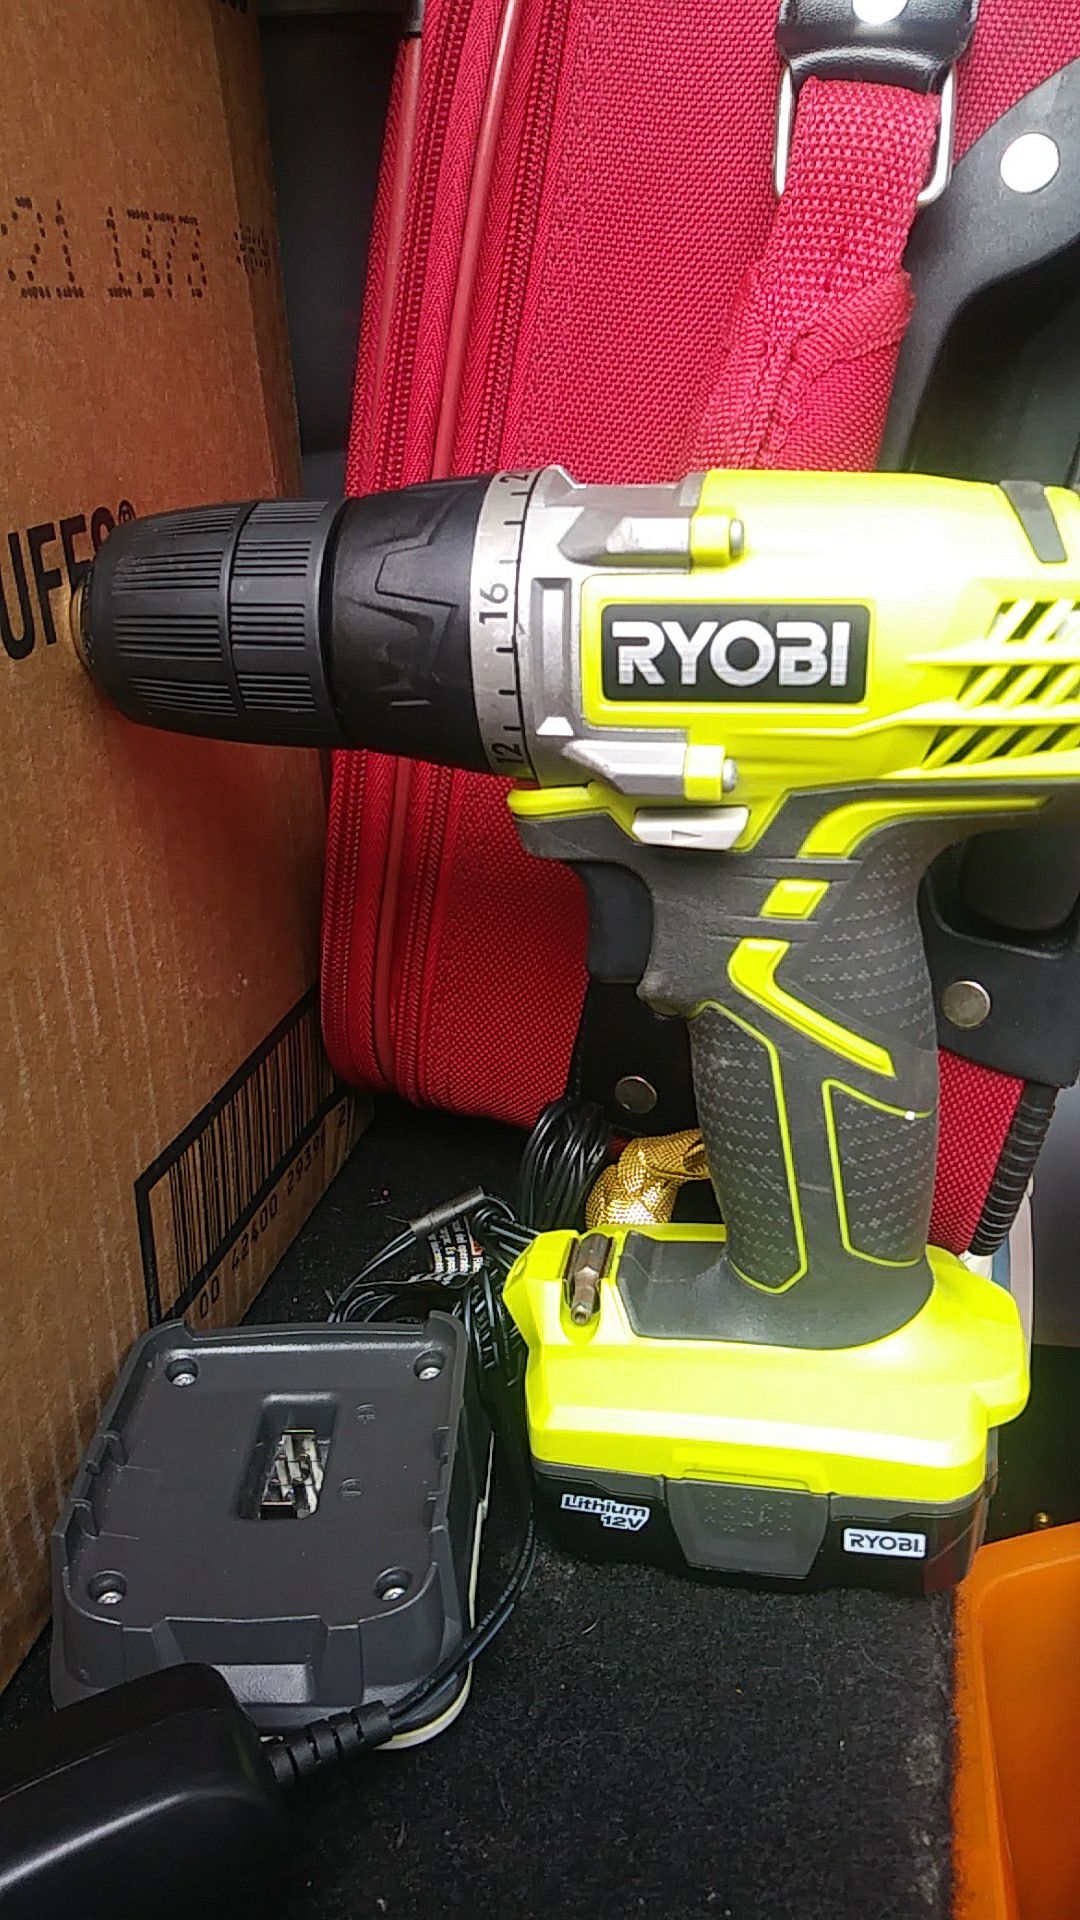 Ryobi drill 12v with battery and charger